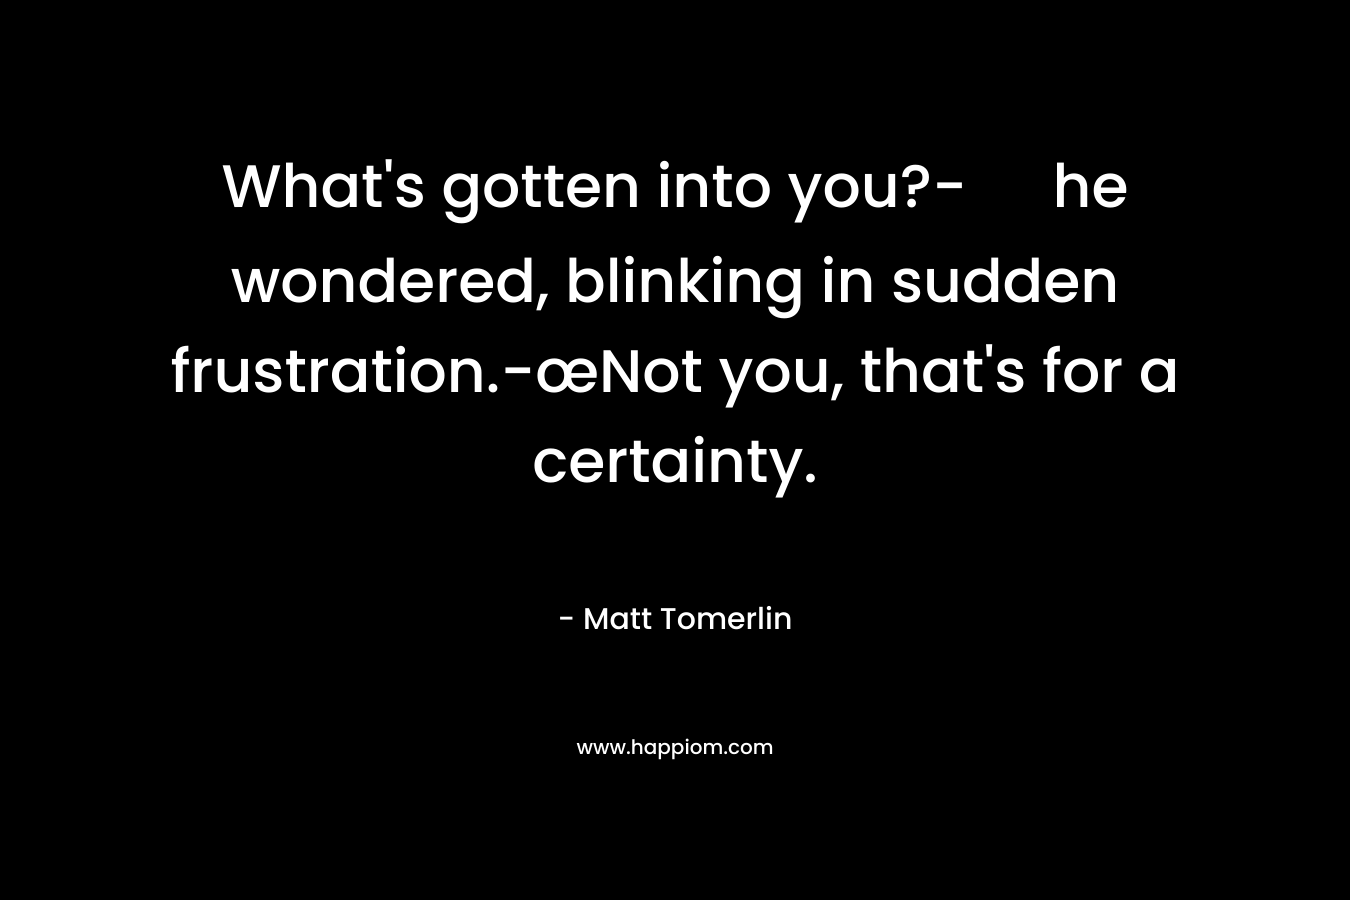 What’s gotten into you?- he wondered, blinking in sudden frustration.-œNot you, that’s for a certainty. – Matt Tomerlin